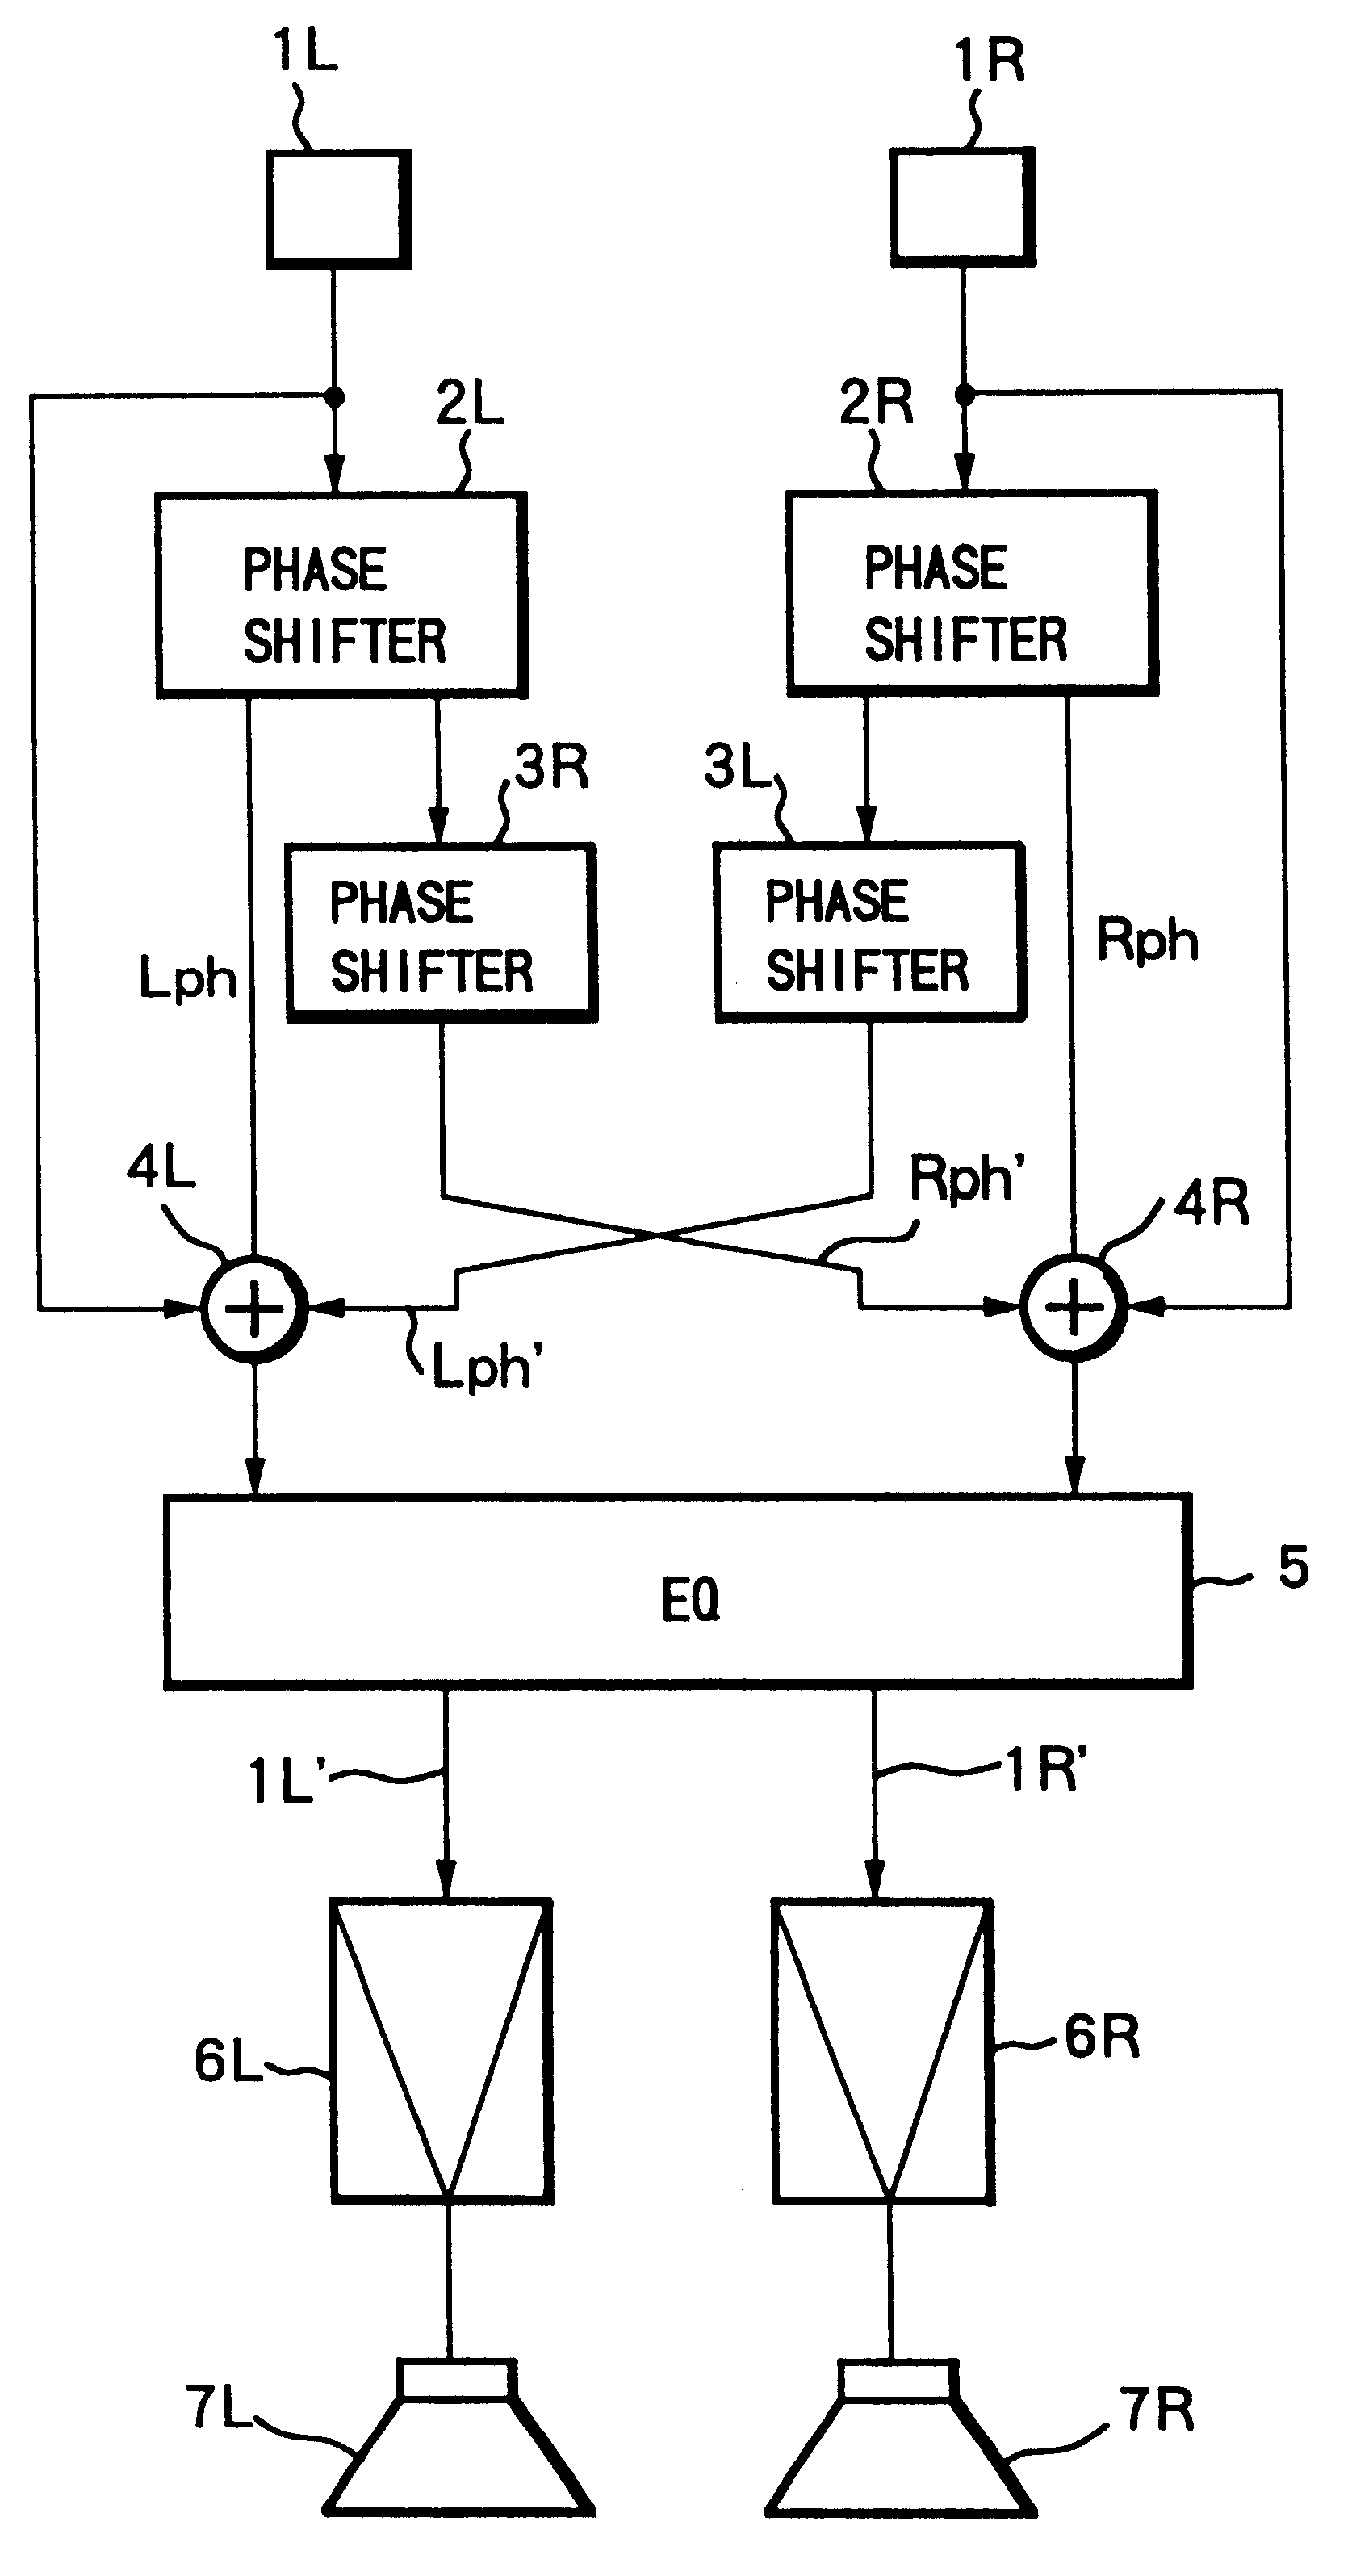 Method for localizing sound image of reproducing sound of audio signals for stereophonic reproduction outside speakers